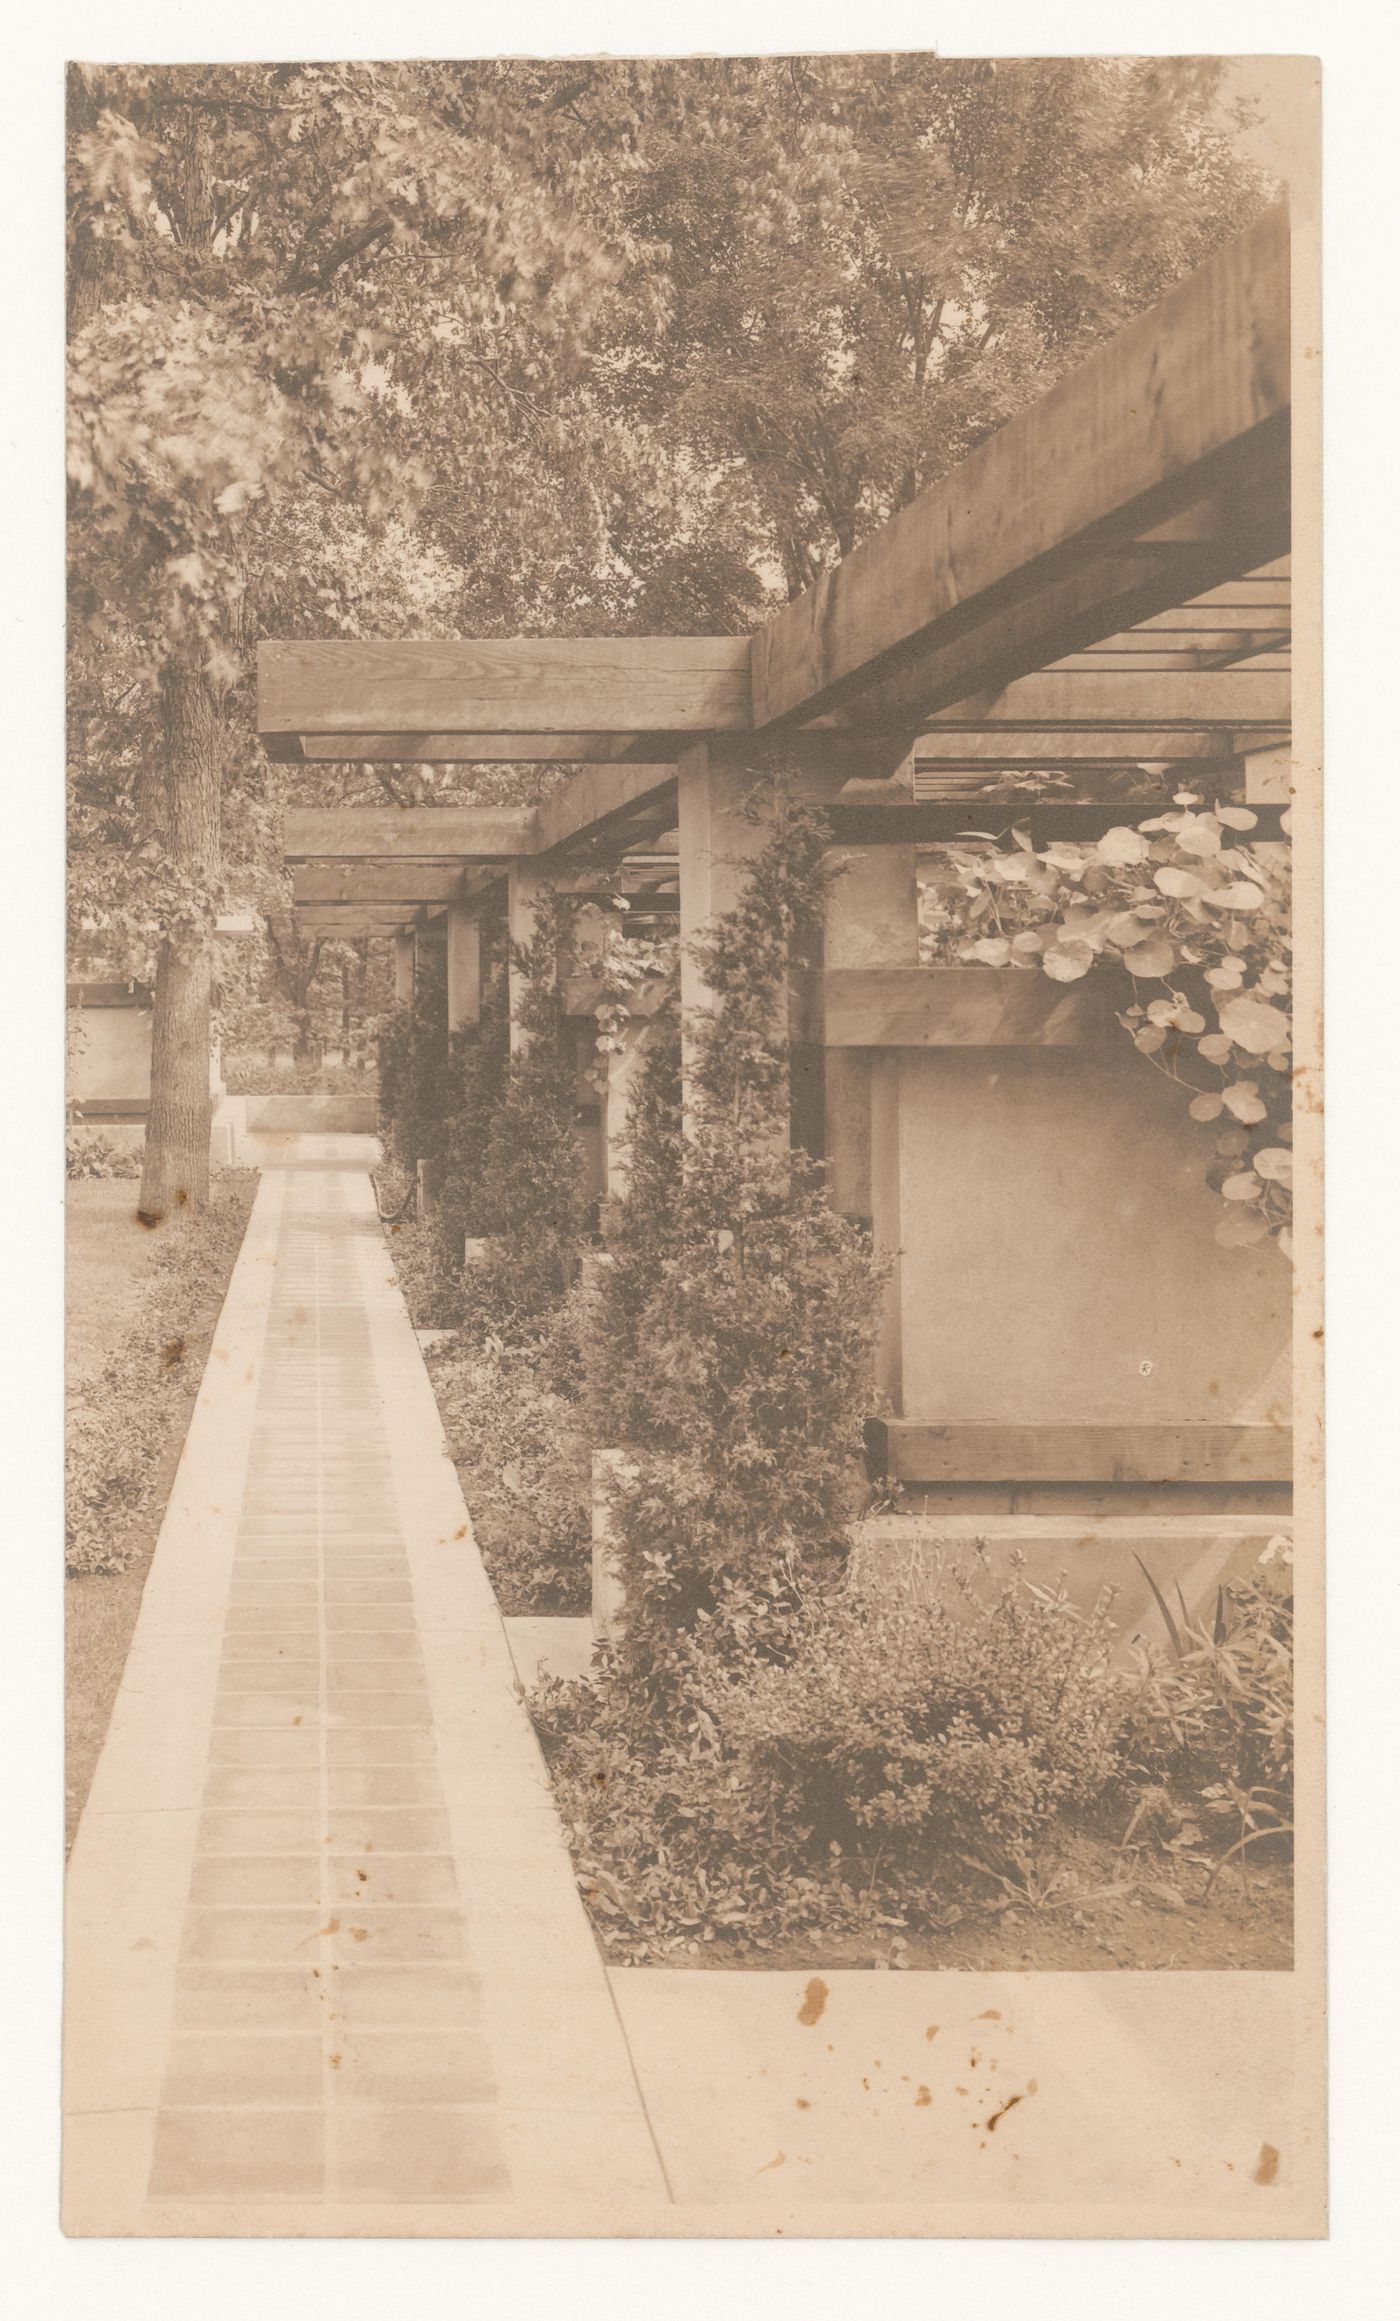 View of Coonley House showing a path, Riverside, Illinois